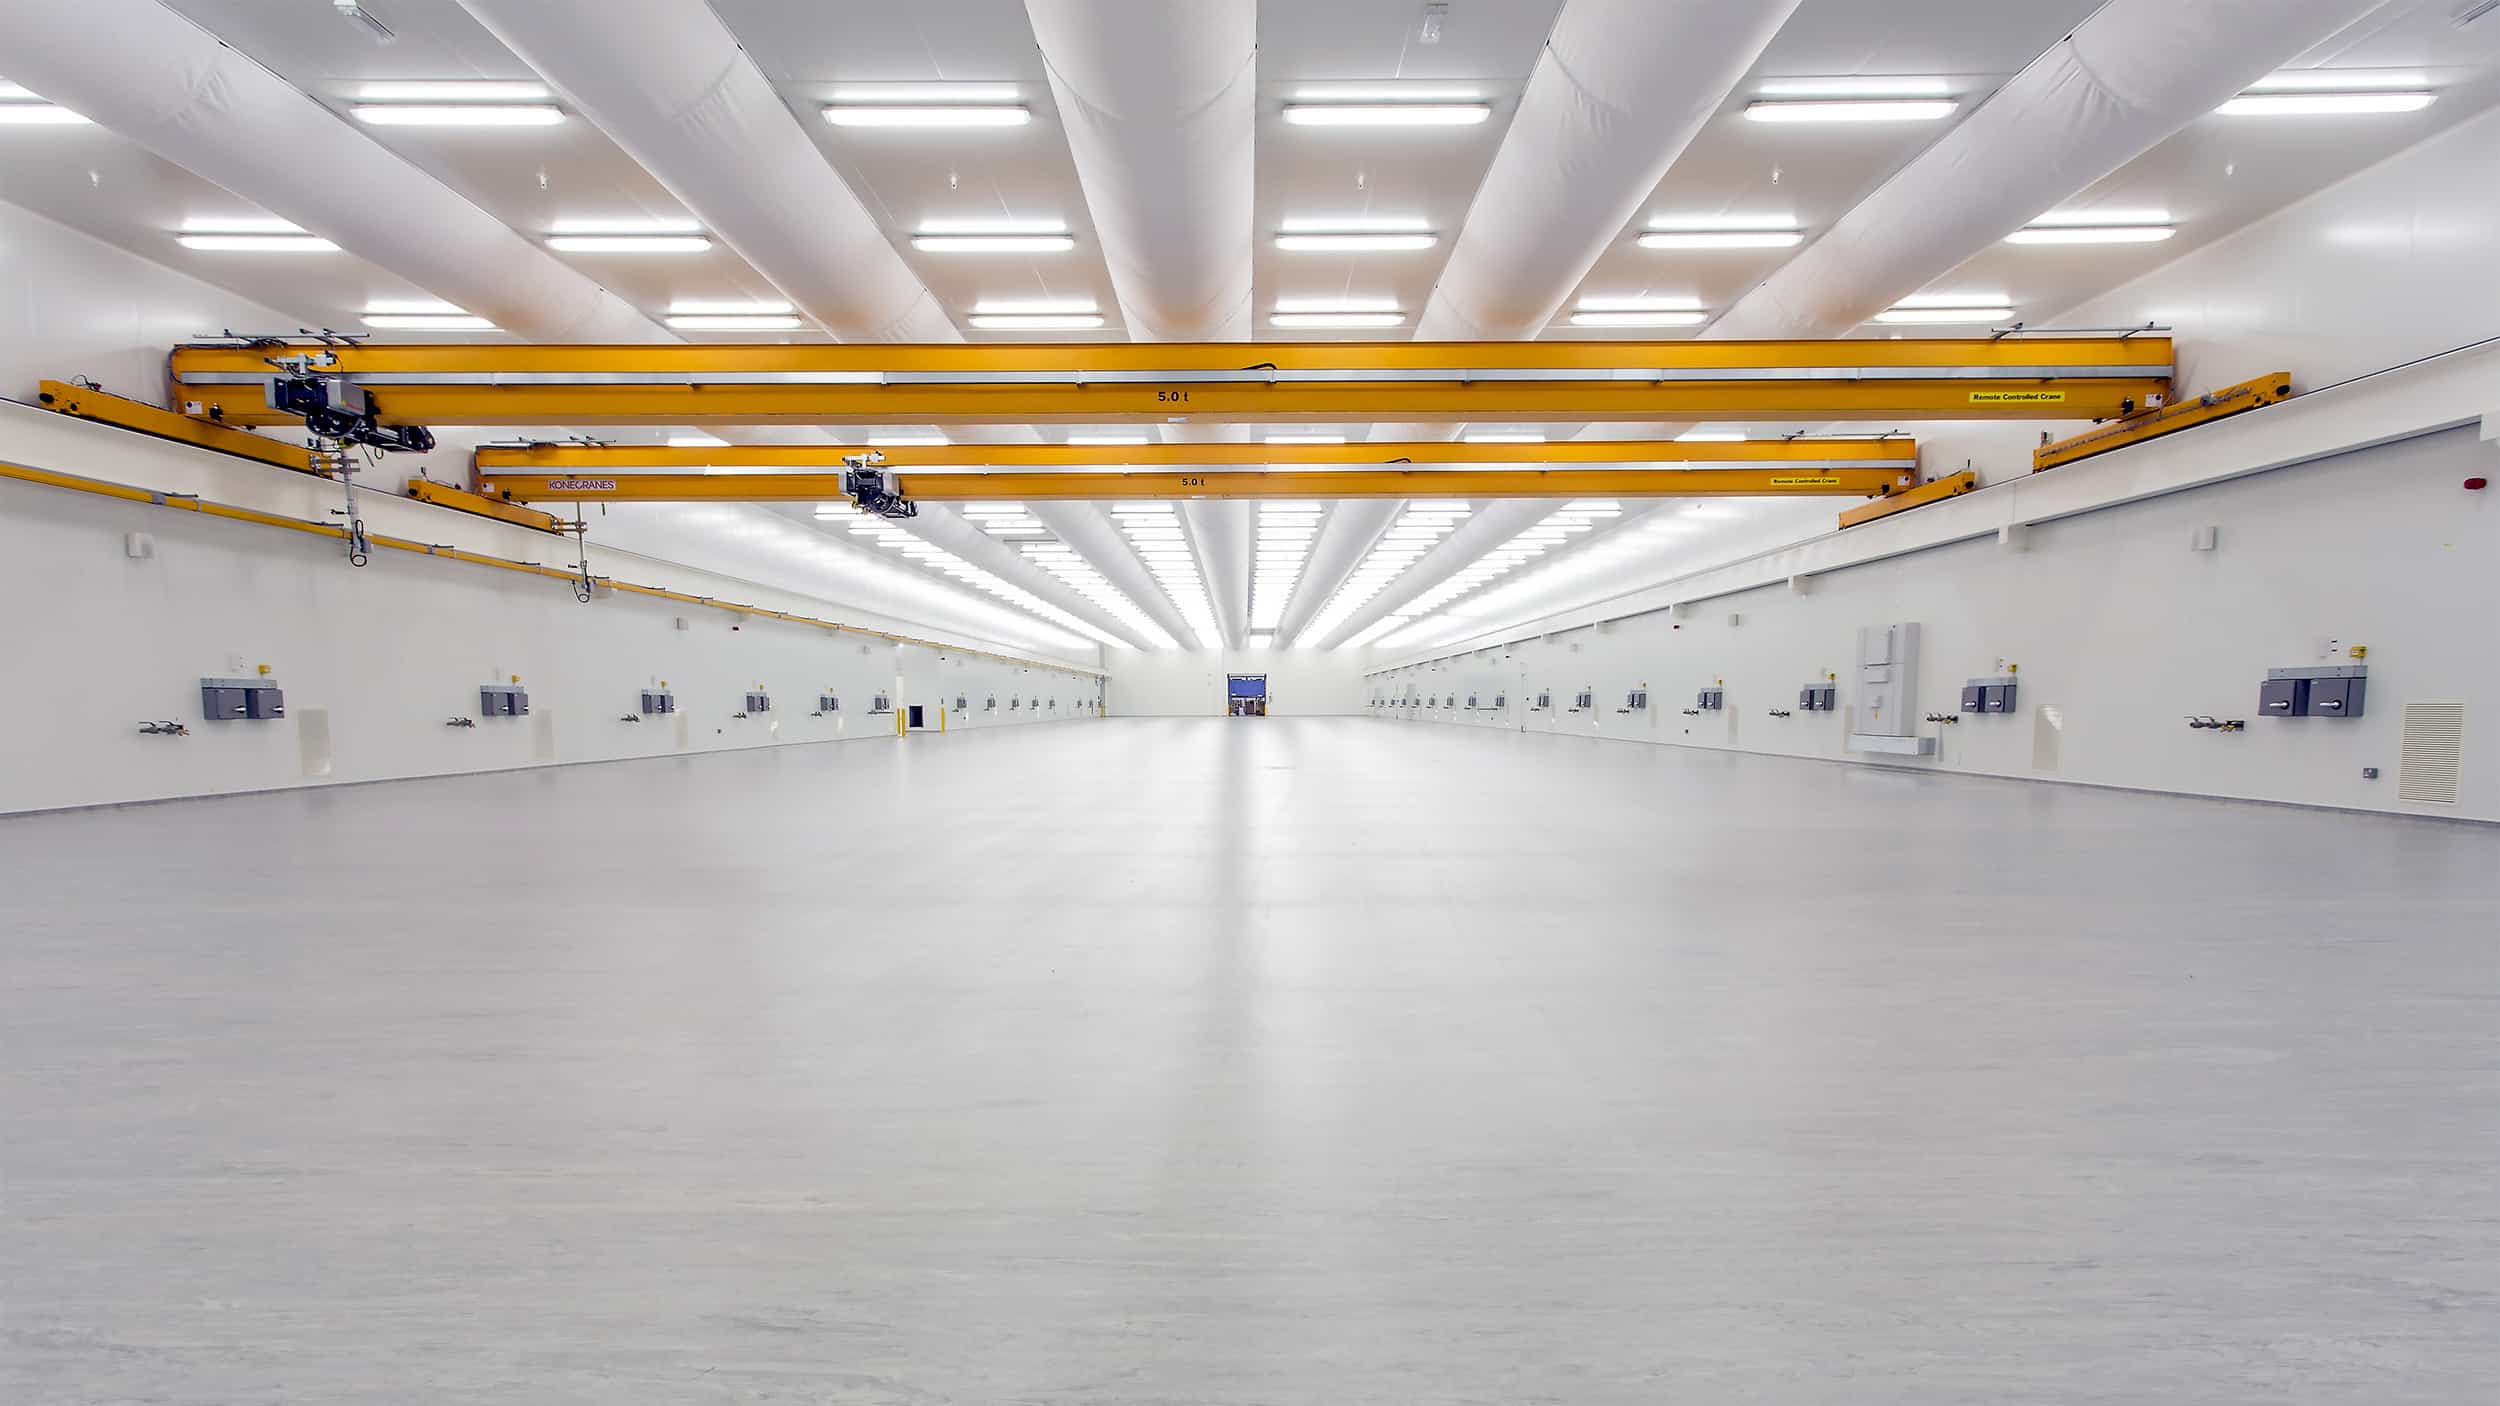 Bespak cleanroom with Prihoda fabric ducts